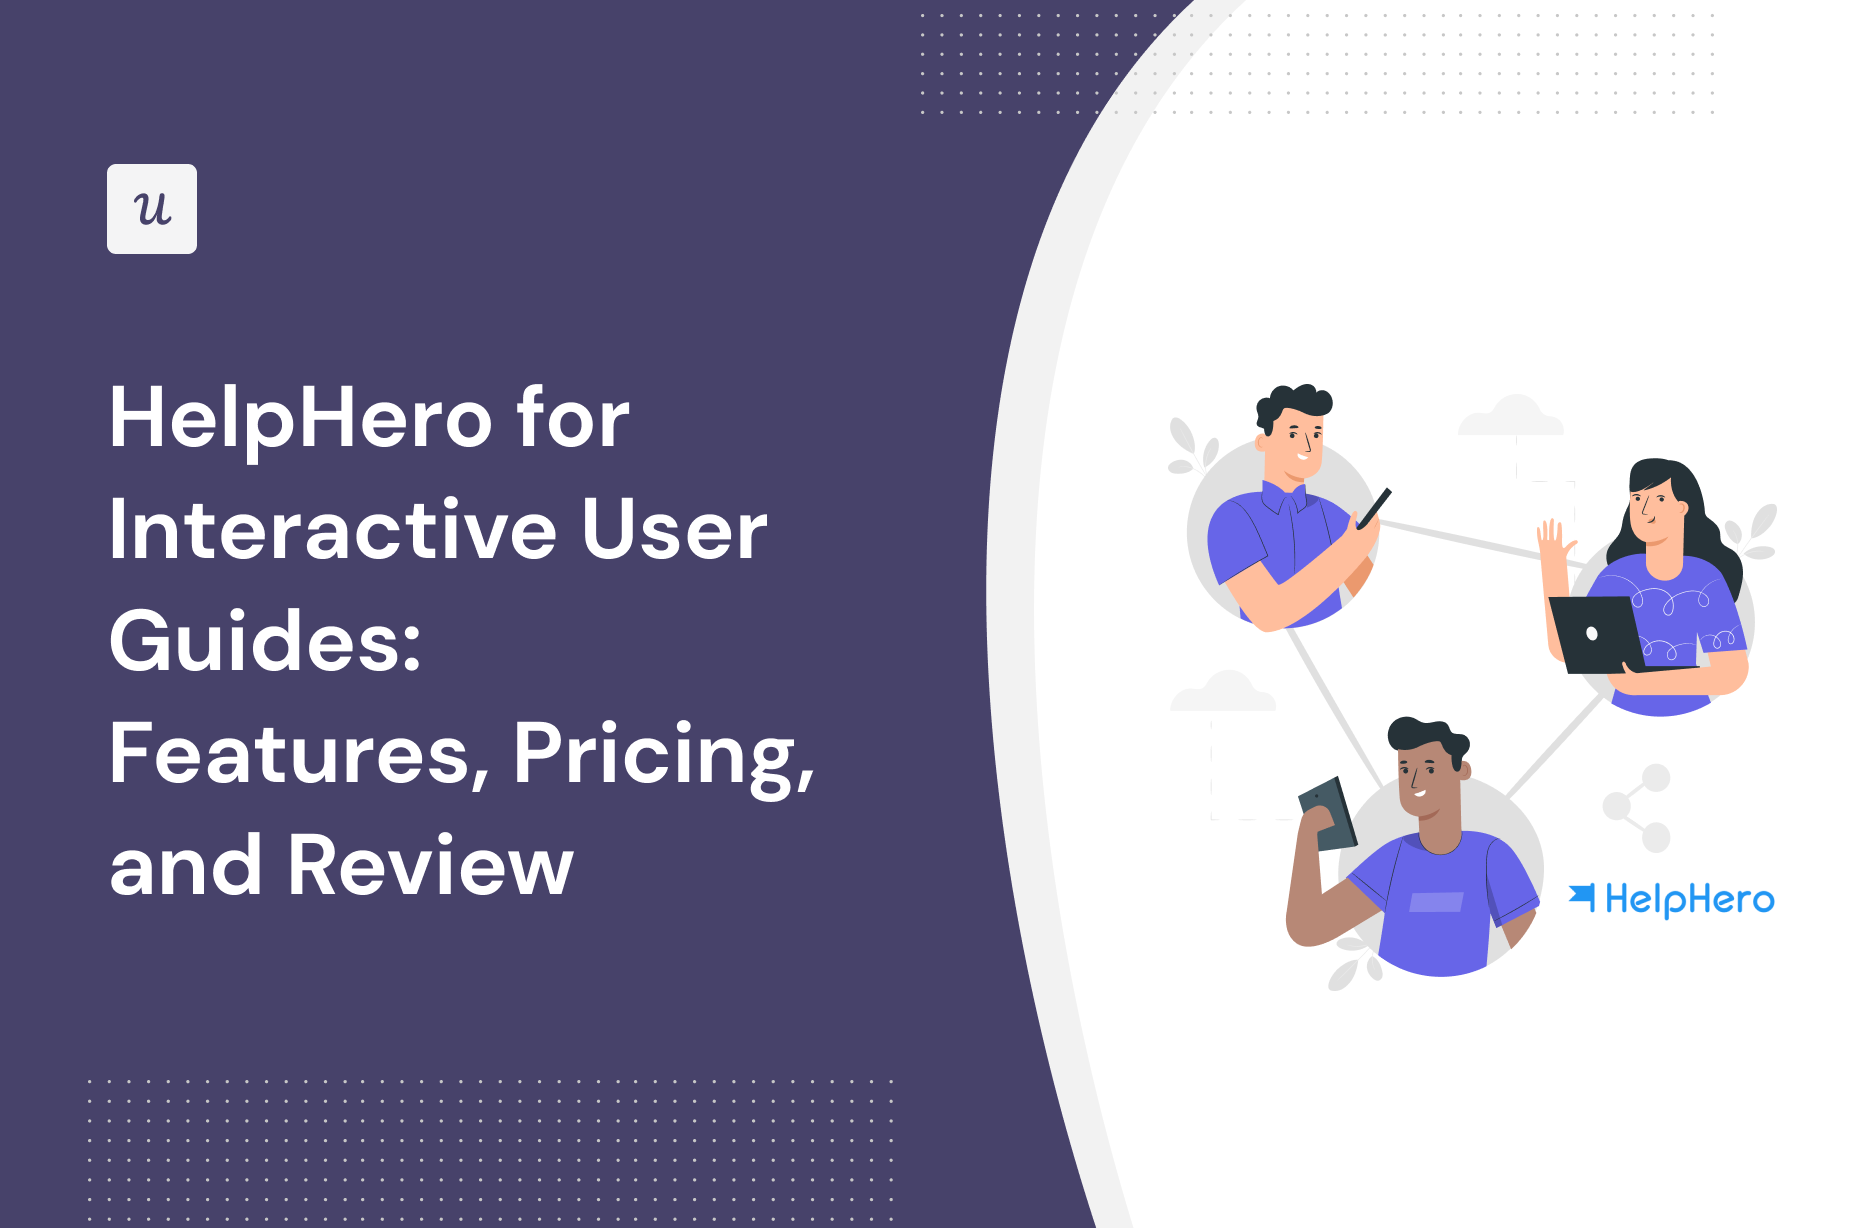 HelpHero for Interactive User Guides: Features, Pricing, and Review